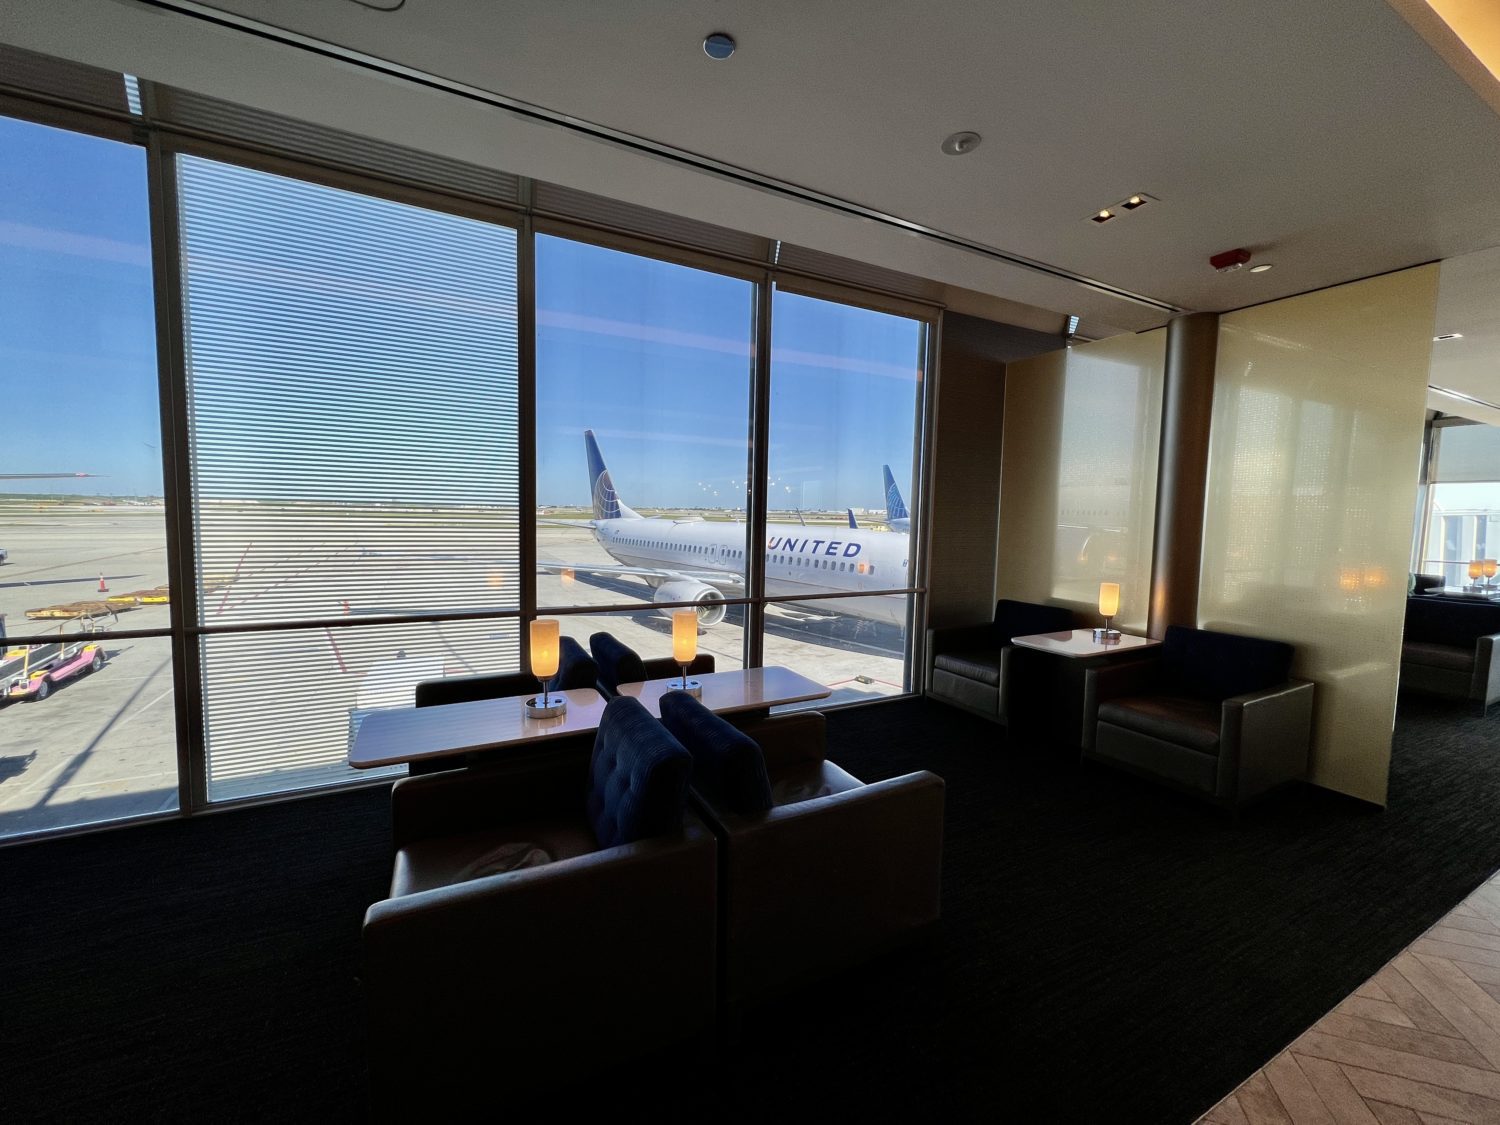 united polaris lounge chicago seating   Beautiful But Busy: United Polaris Lounge Chicago-O&#039;Hare (ORD) Review – Thrifty Traveler &#8211; Thrifty Traveler united polaris lounge chicago seating 4 scaled